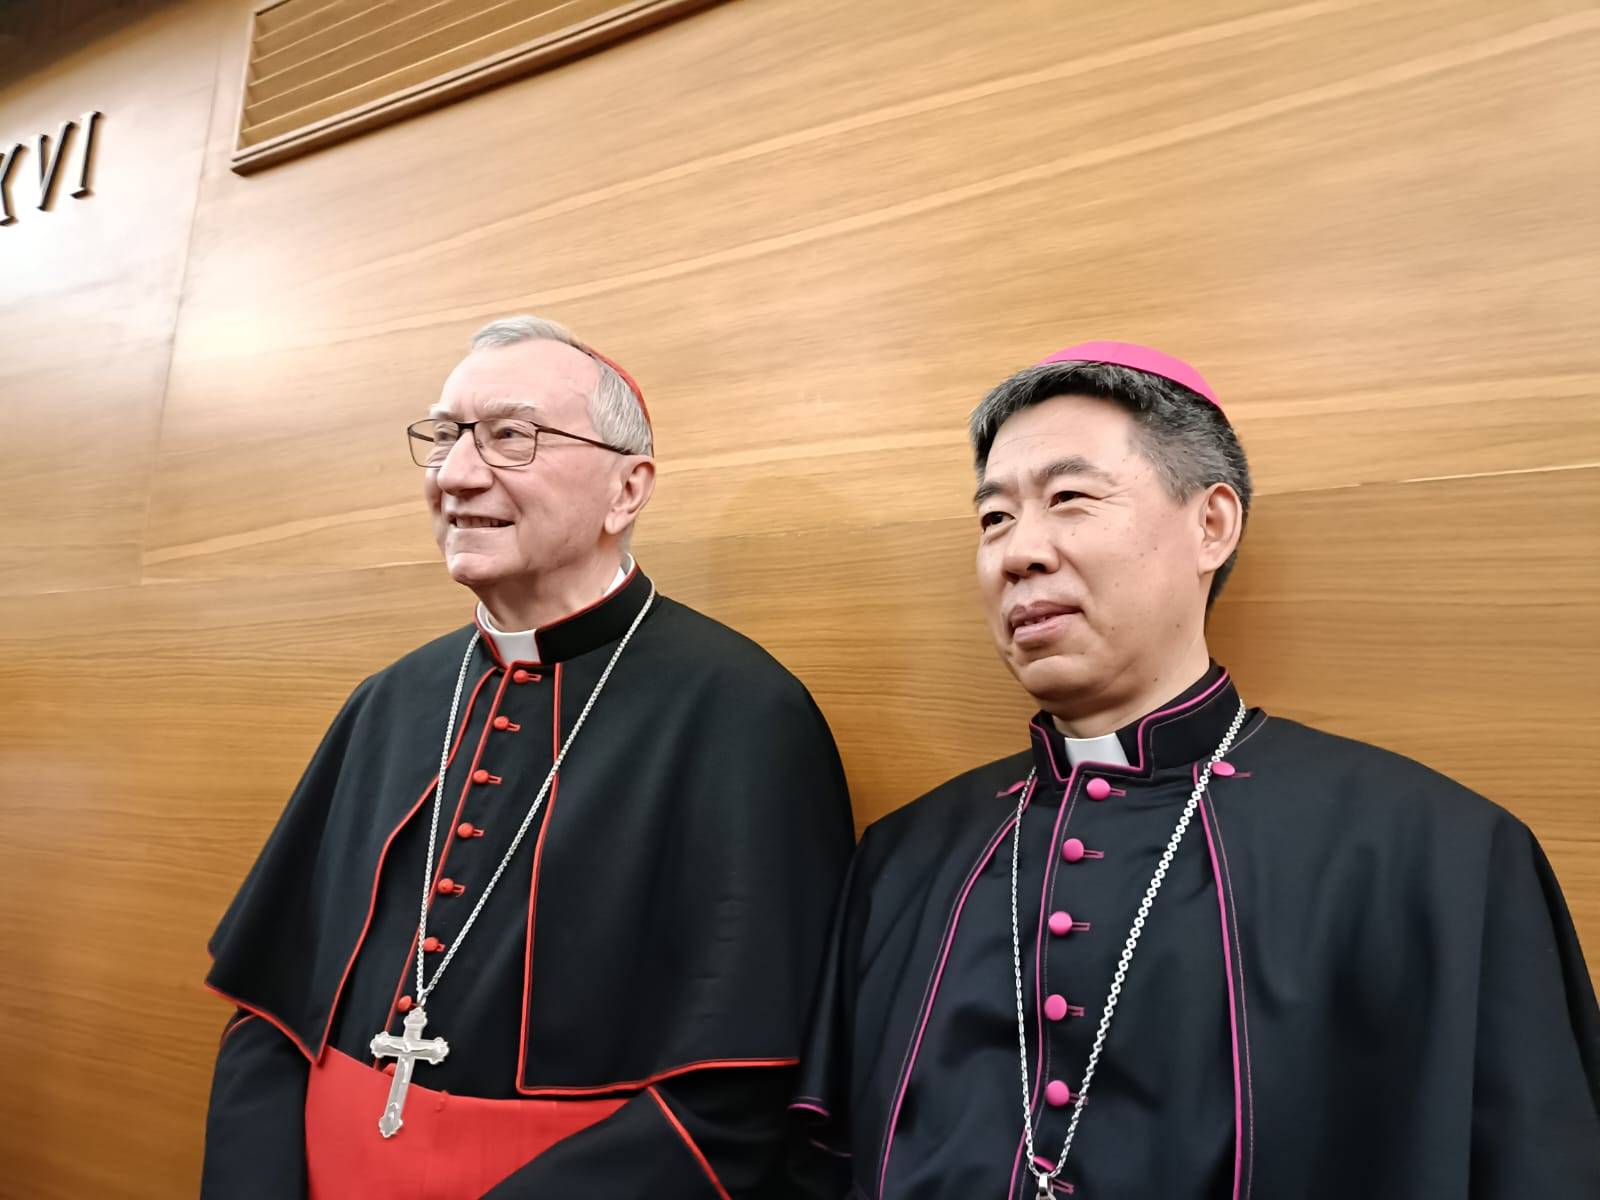 Cardinal Pietro Parolin, left, poses for a photo with Bishop Joseph Shen Bin of Shanghai at a conference at the Pontifical Urban University in Rome on May 21, 2024. (Credit: Elise Ann Allen/Crux.)